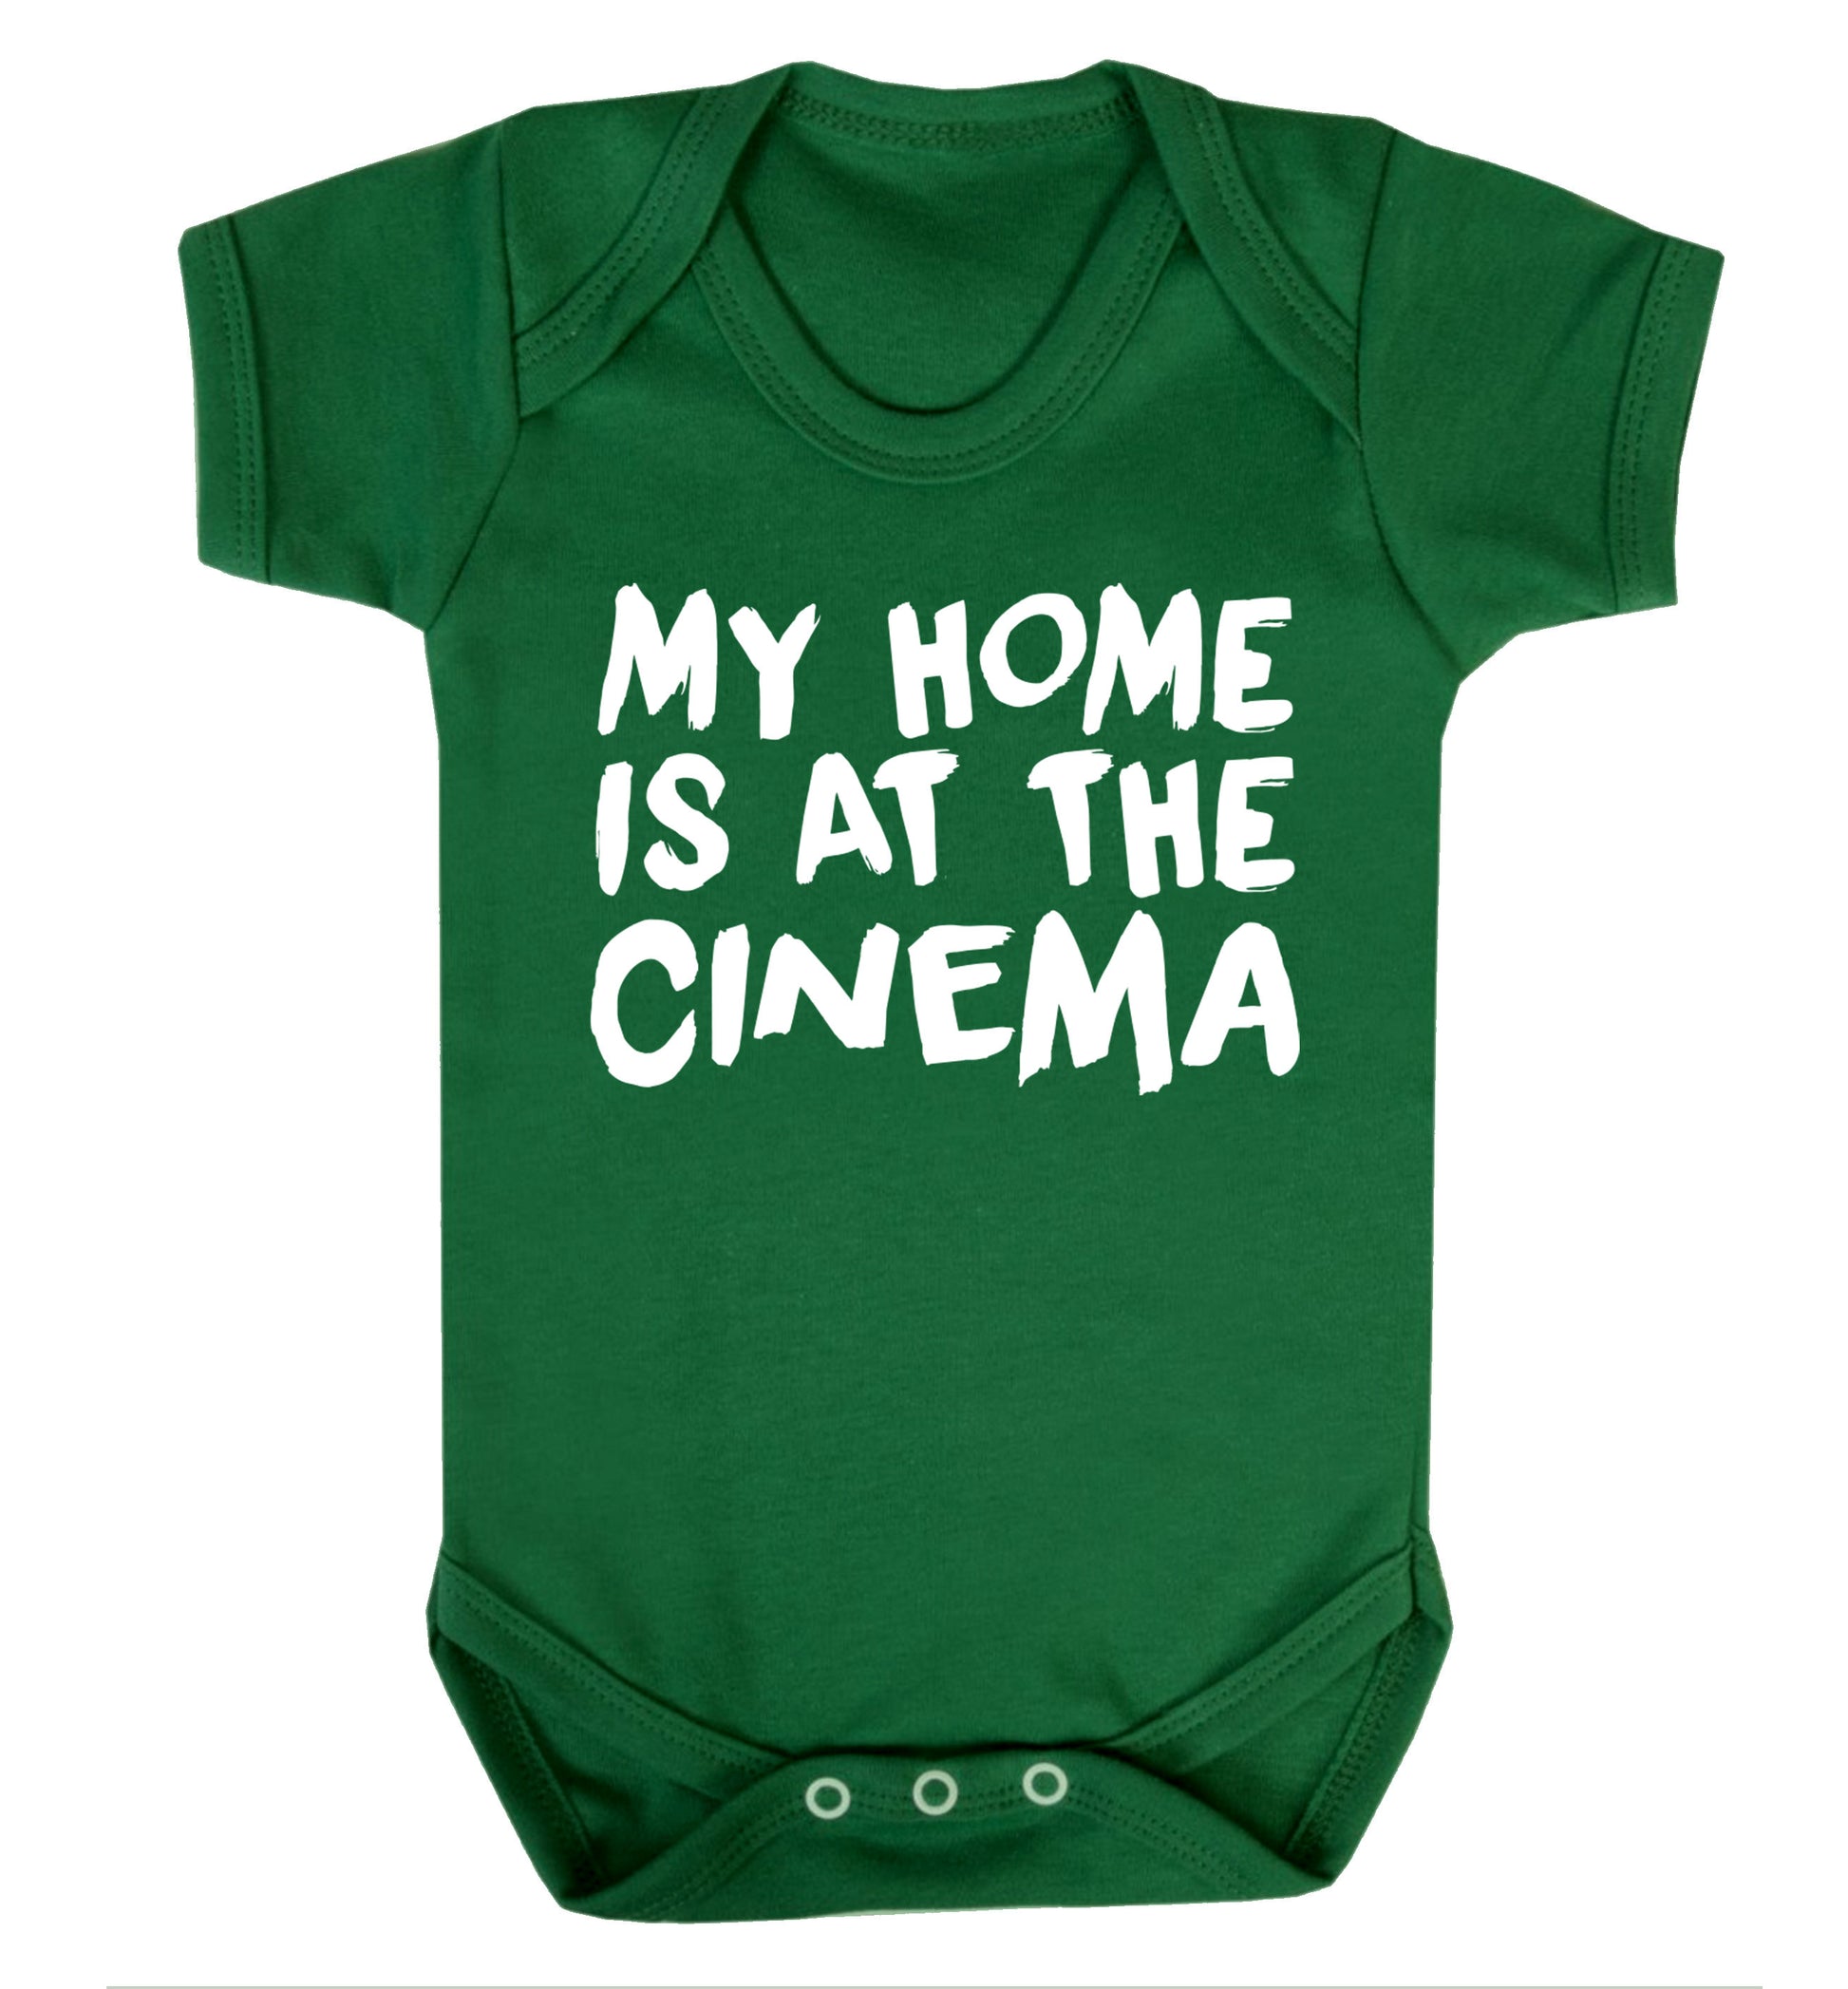 My home is at the cinema Baby Vest green 18-24 months